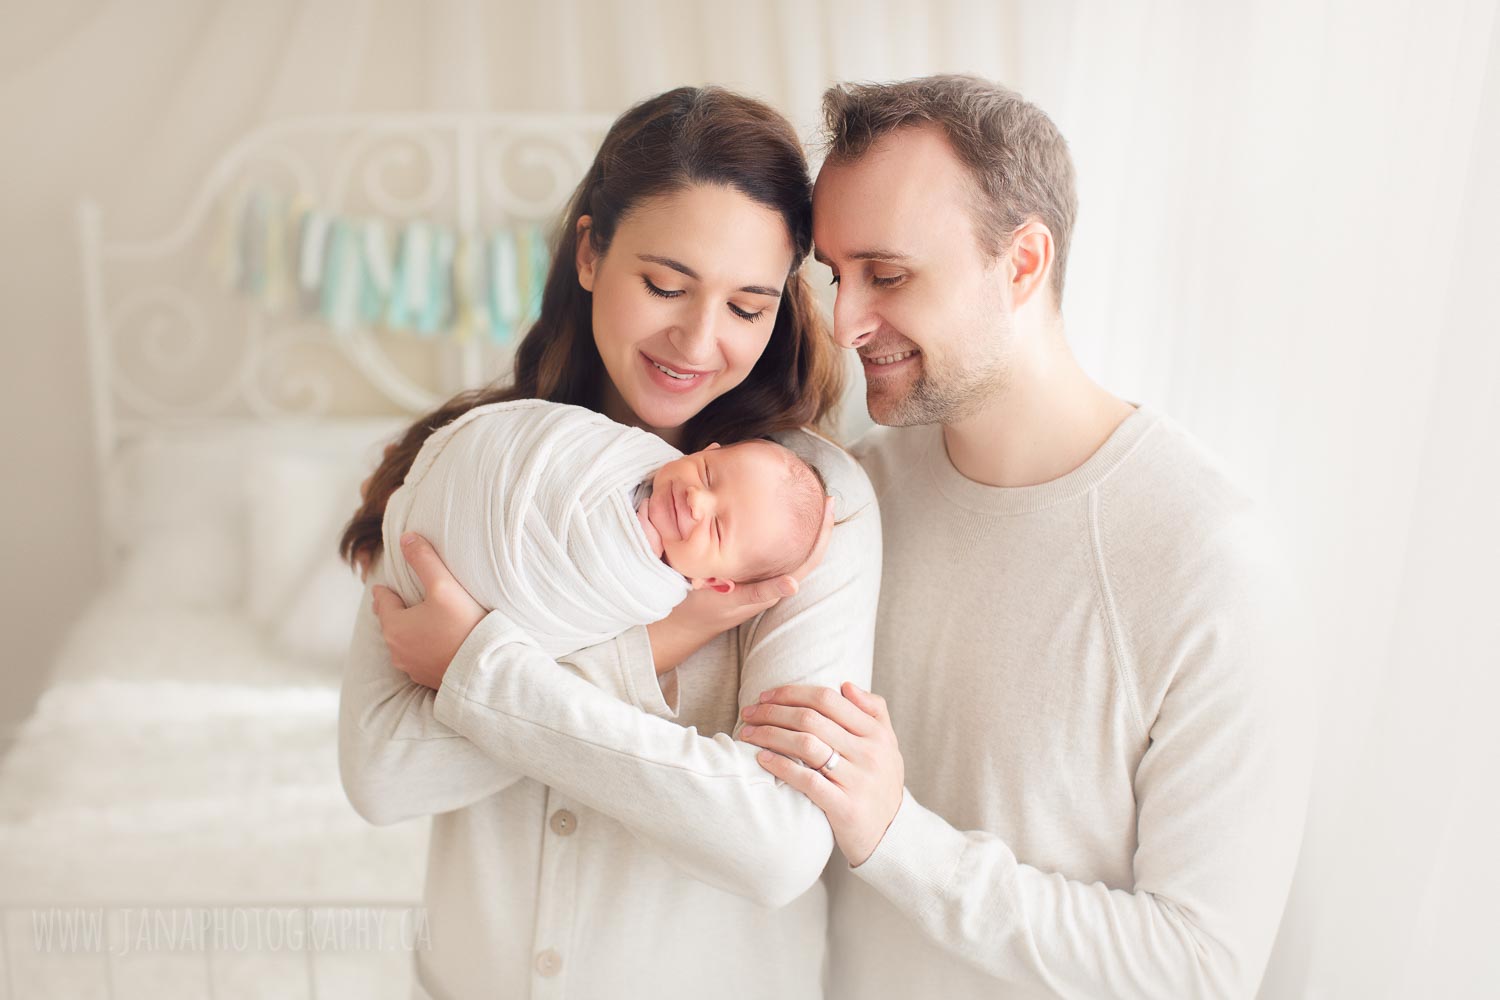 mom and dad holding their newborn baby boy - smile - natural light